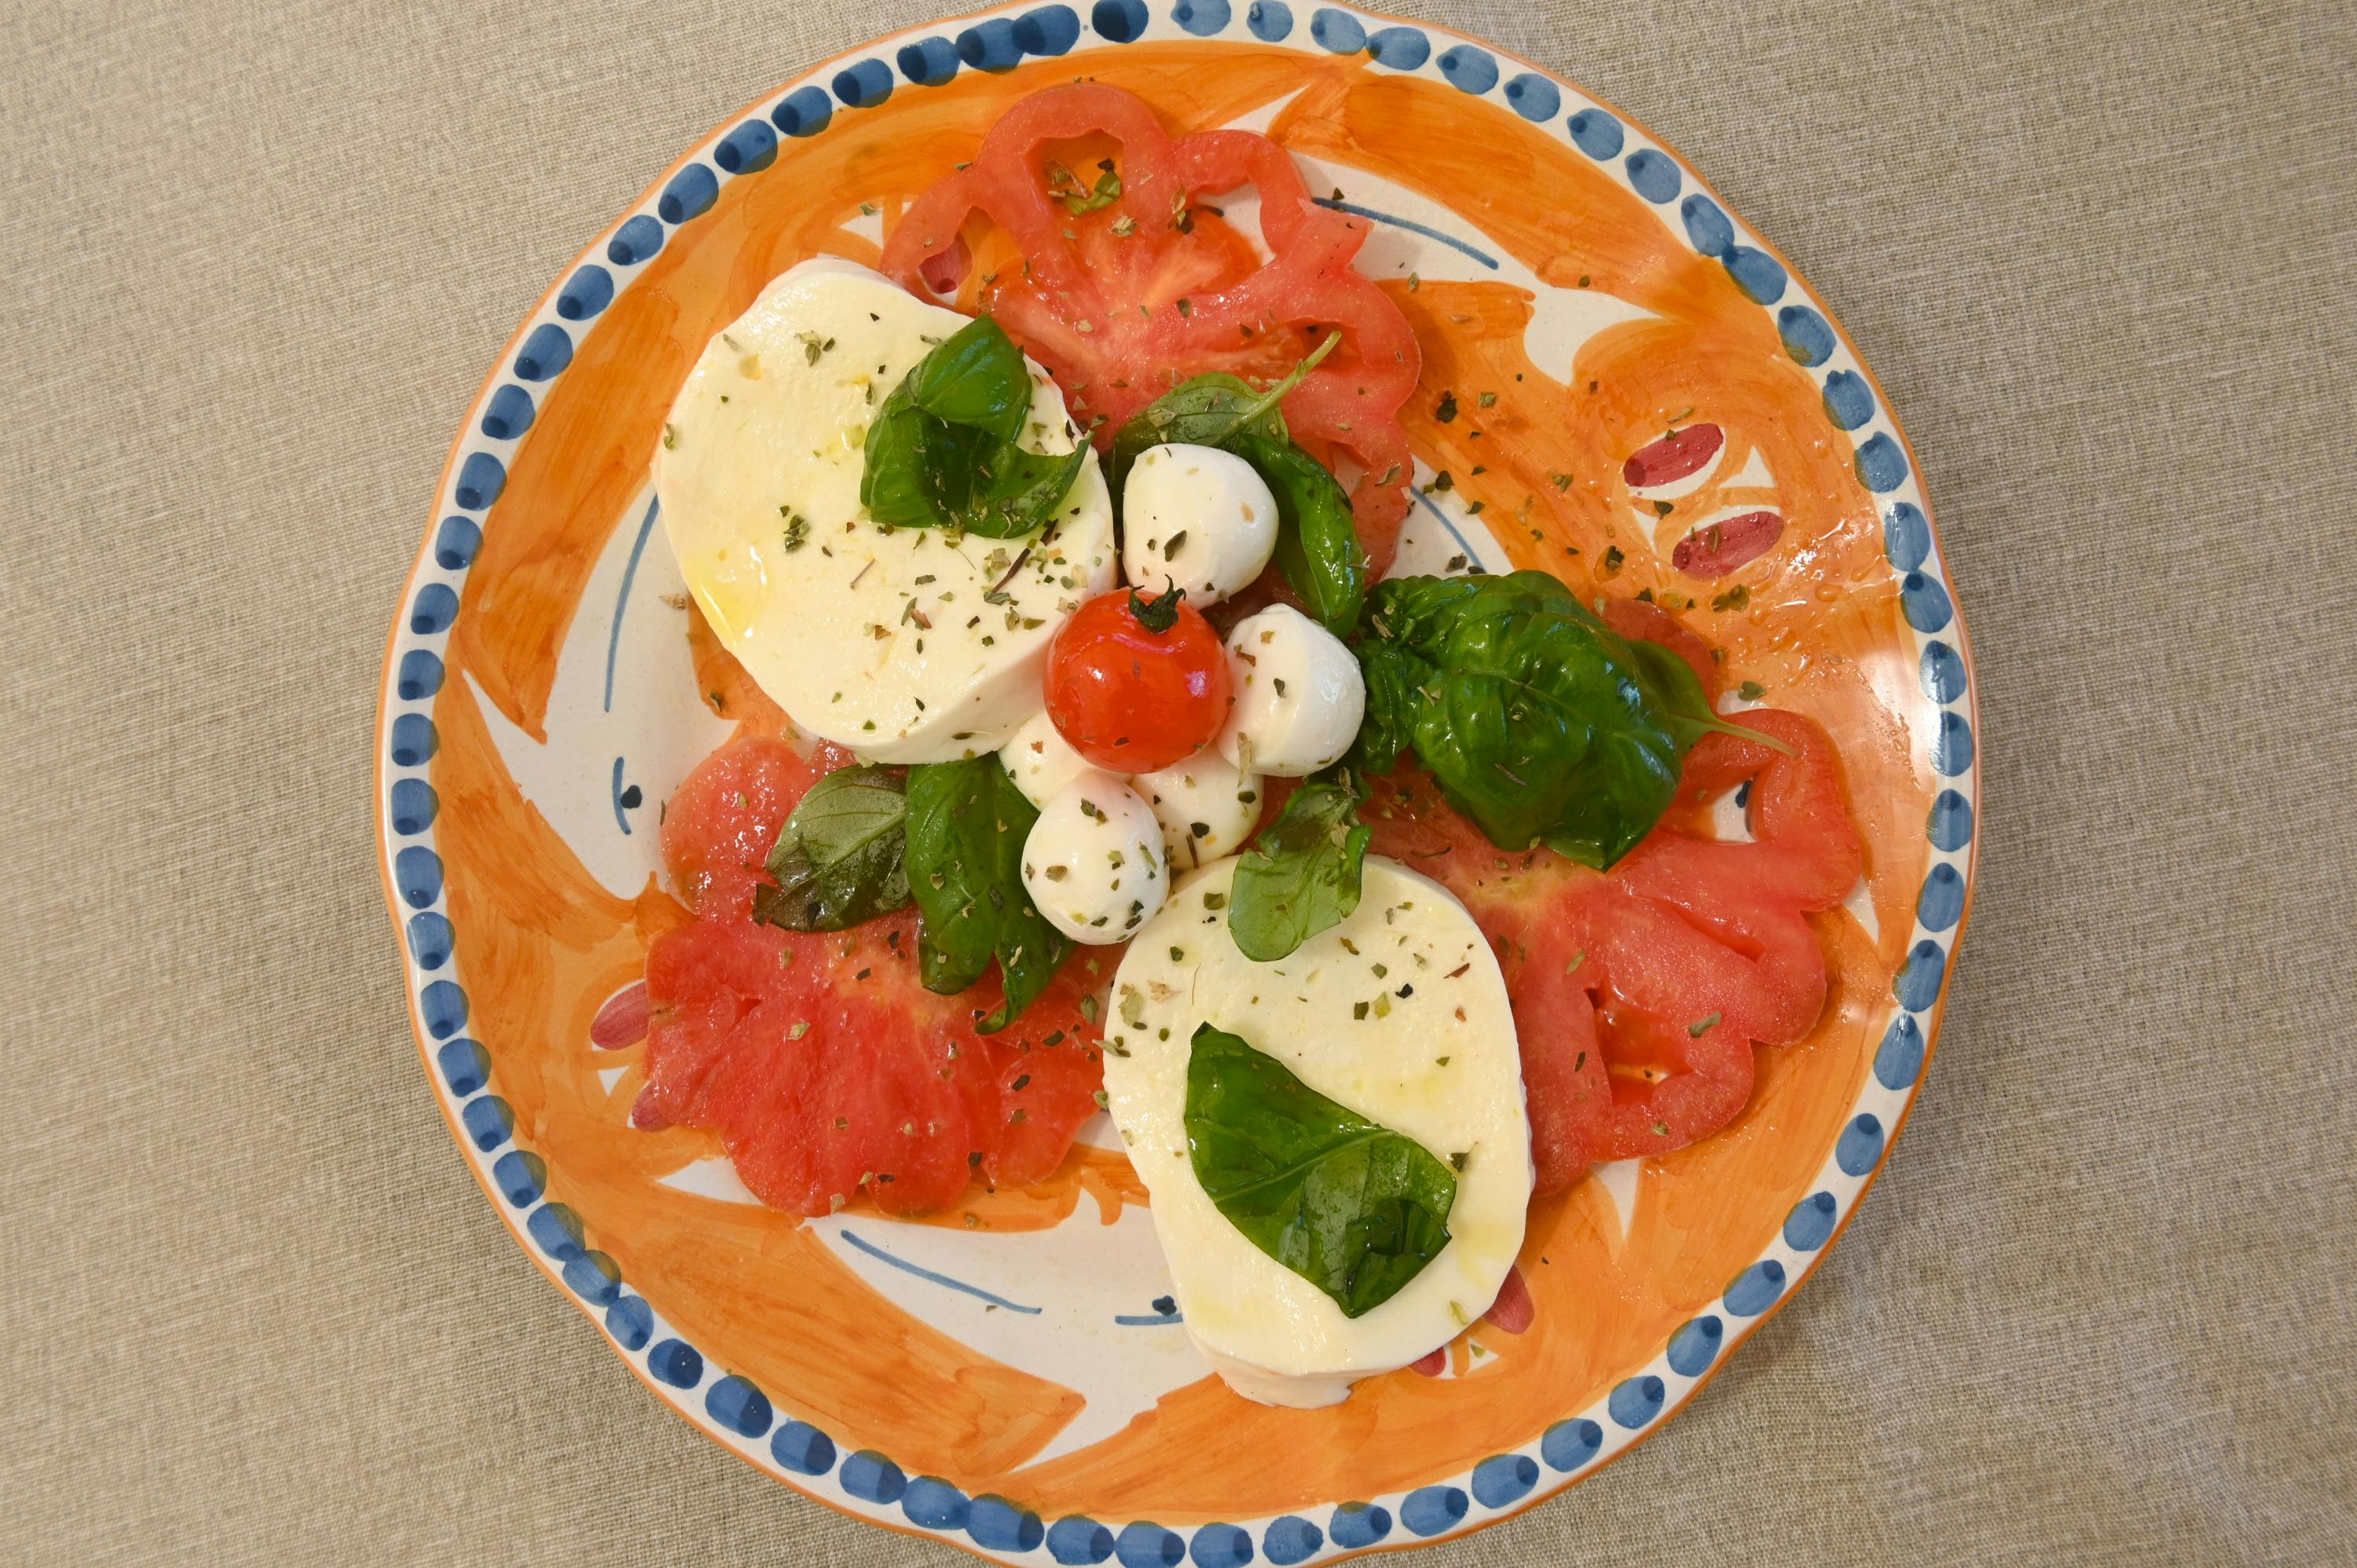 Top view of a plate of Caprese salad